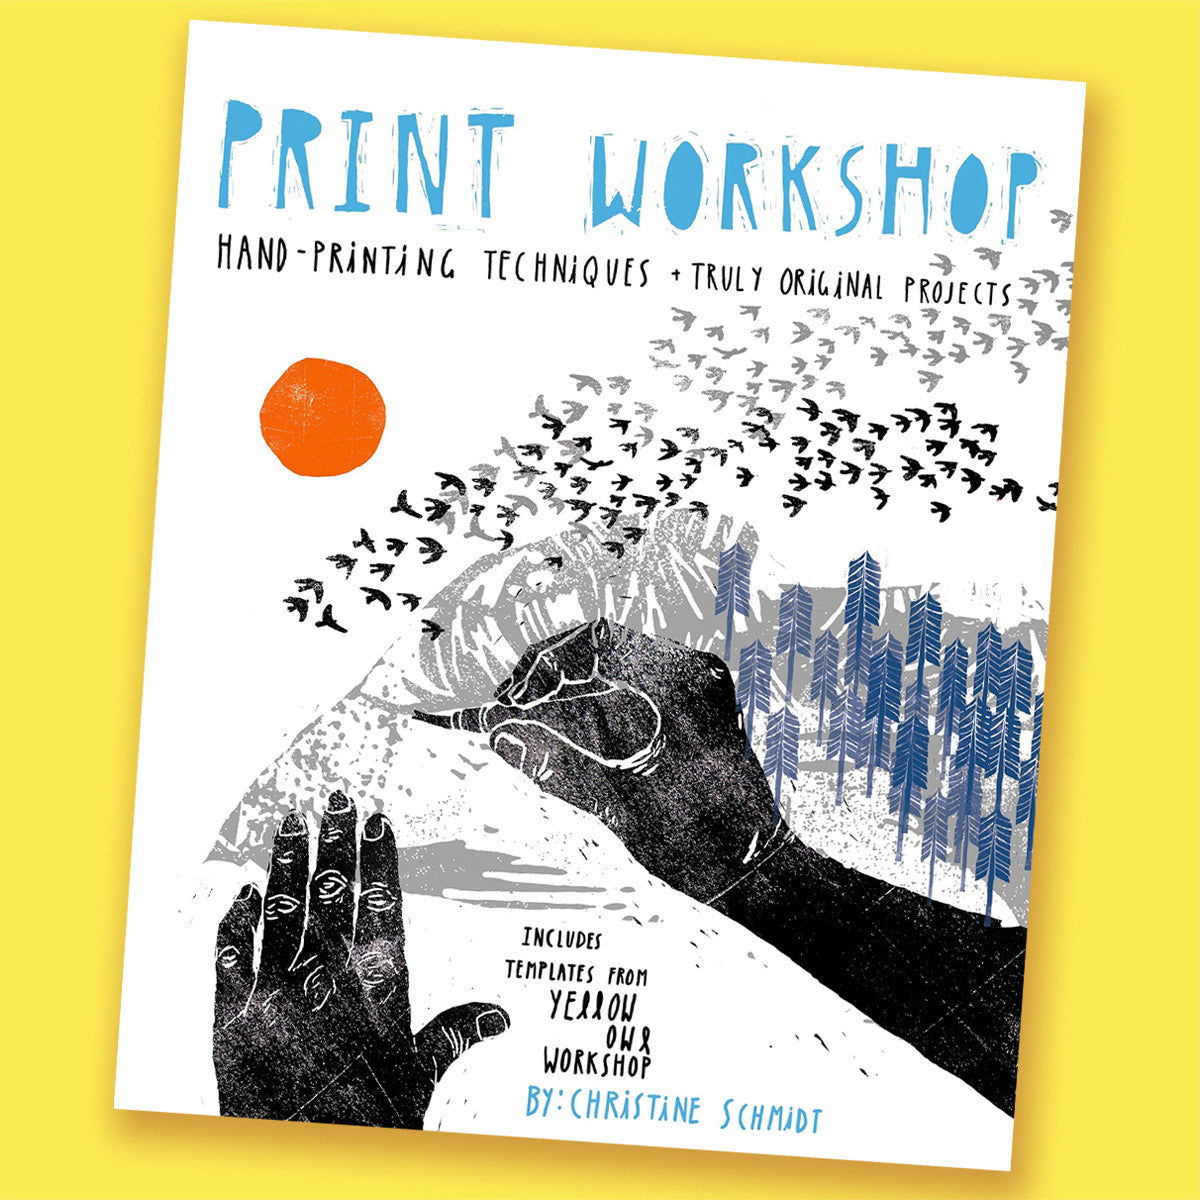 Print Workshop: Hand-Printing Techniques and Truly Original Projects by Christine Schmidt